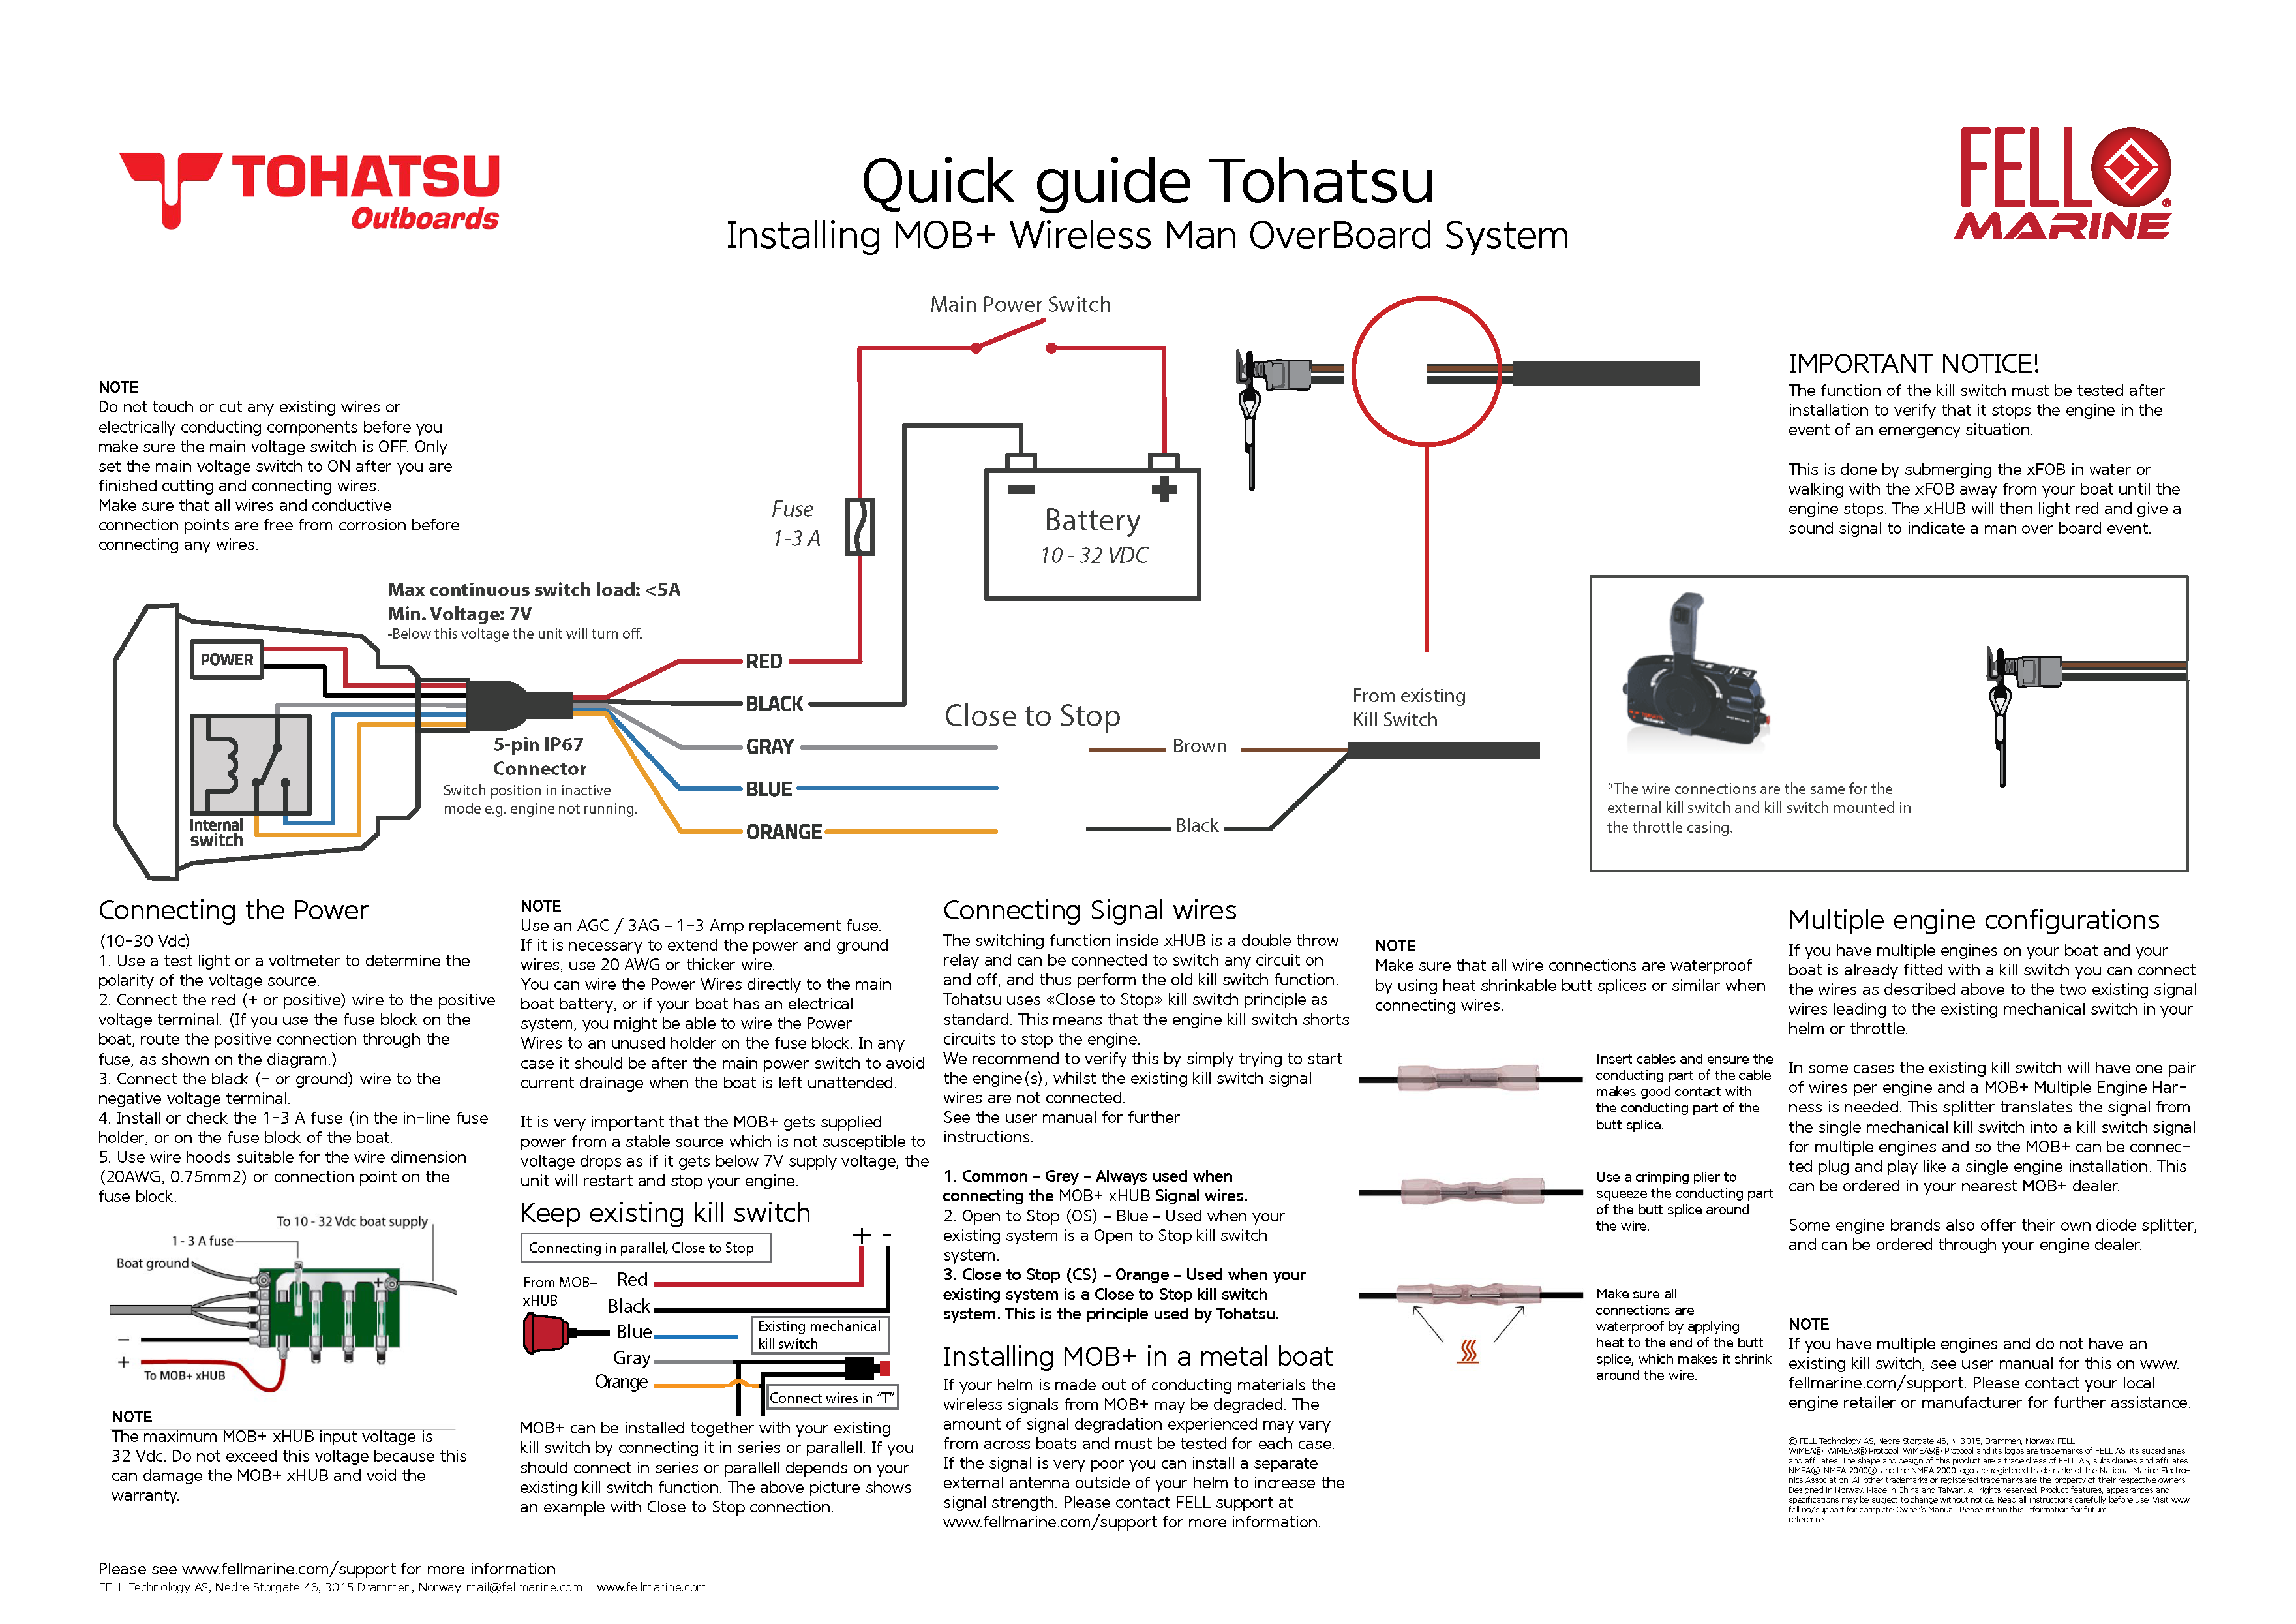 Tohatsu_QuickGuide.png